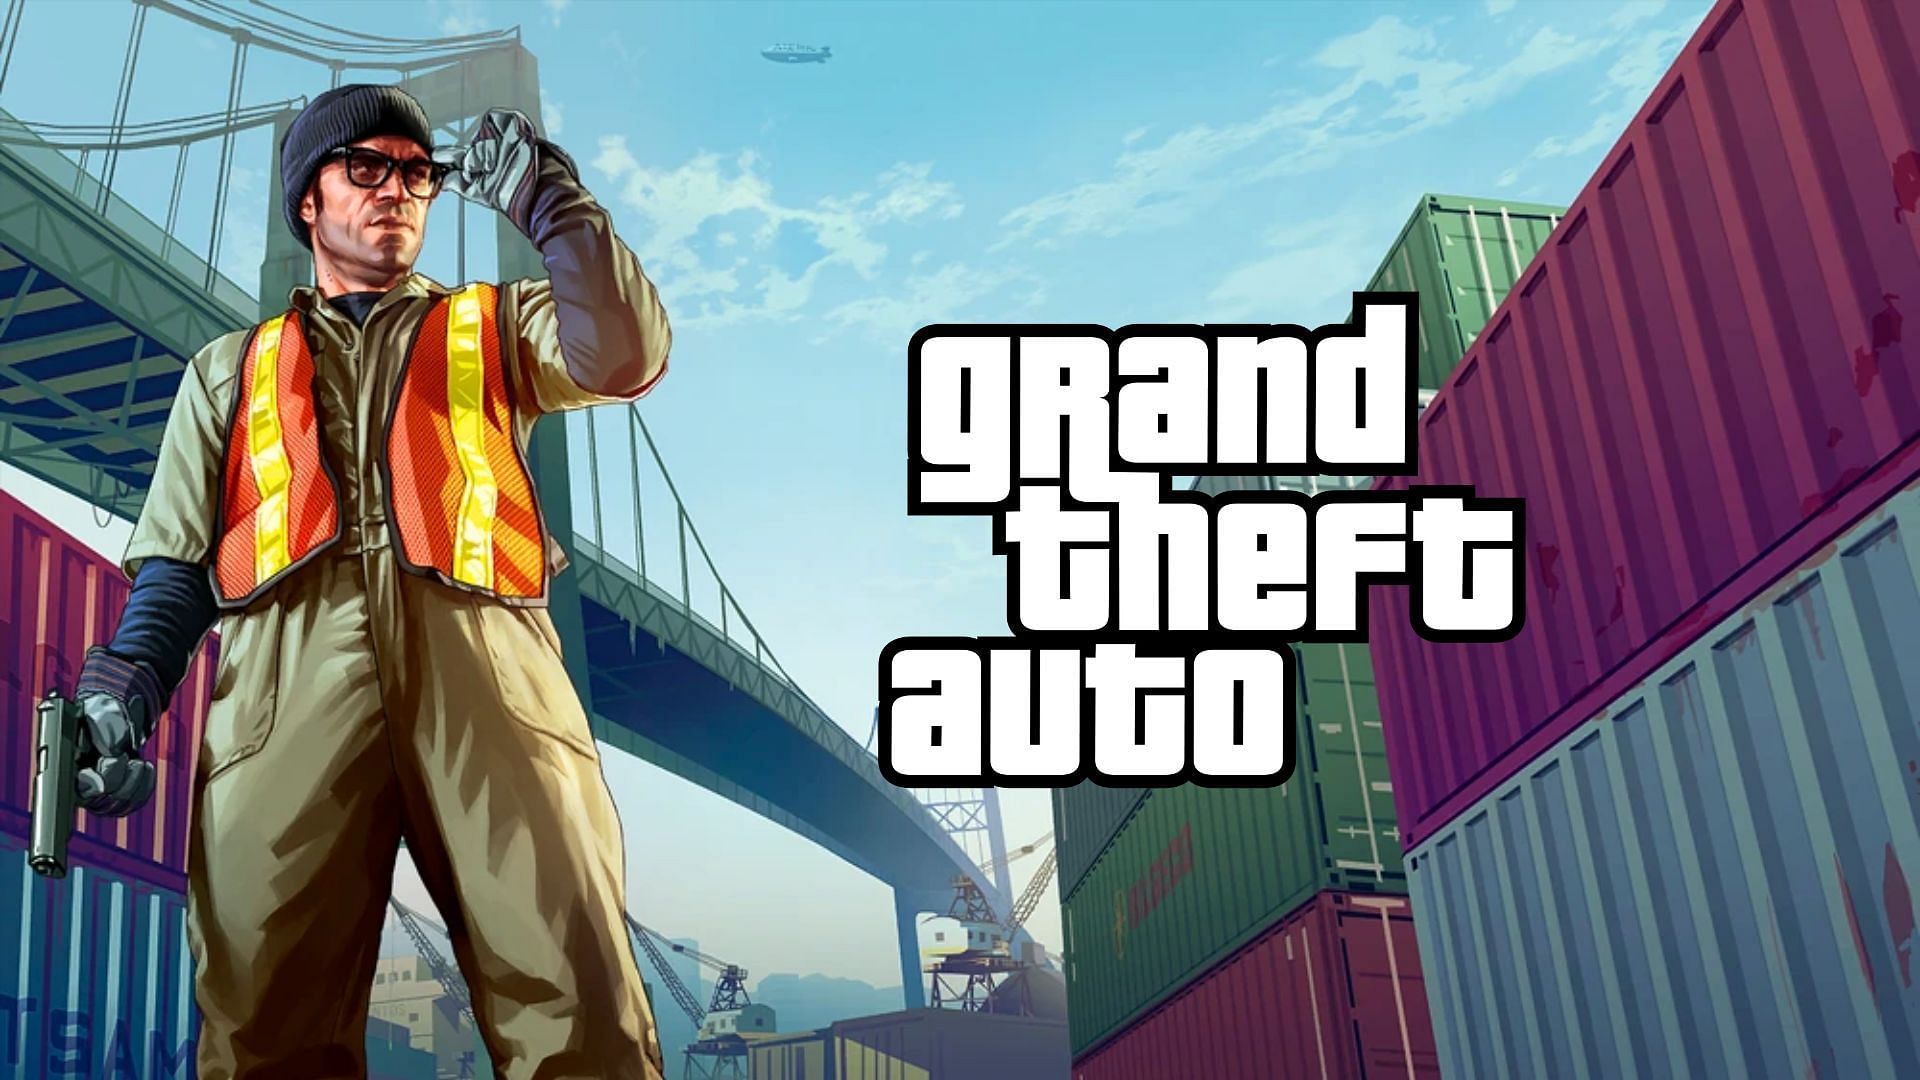 Five tiresome missions in the GTA series (Image via Rockstar Games)